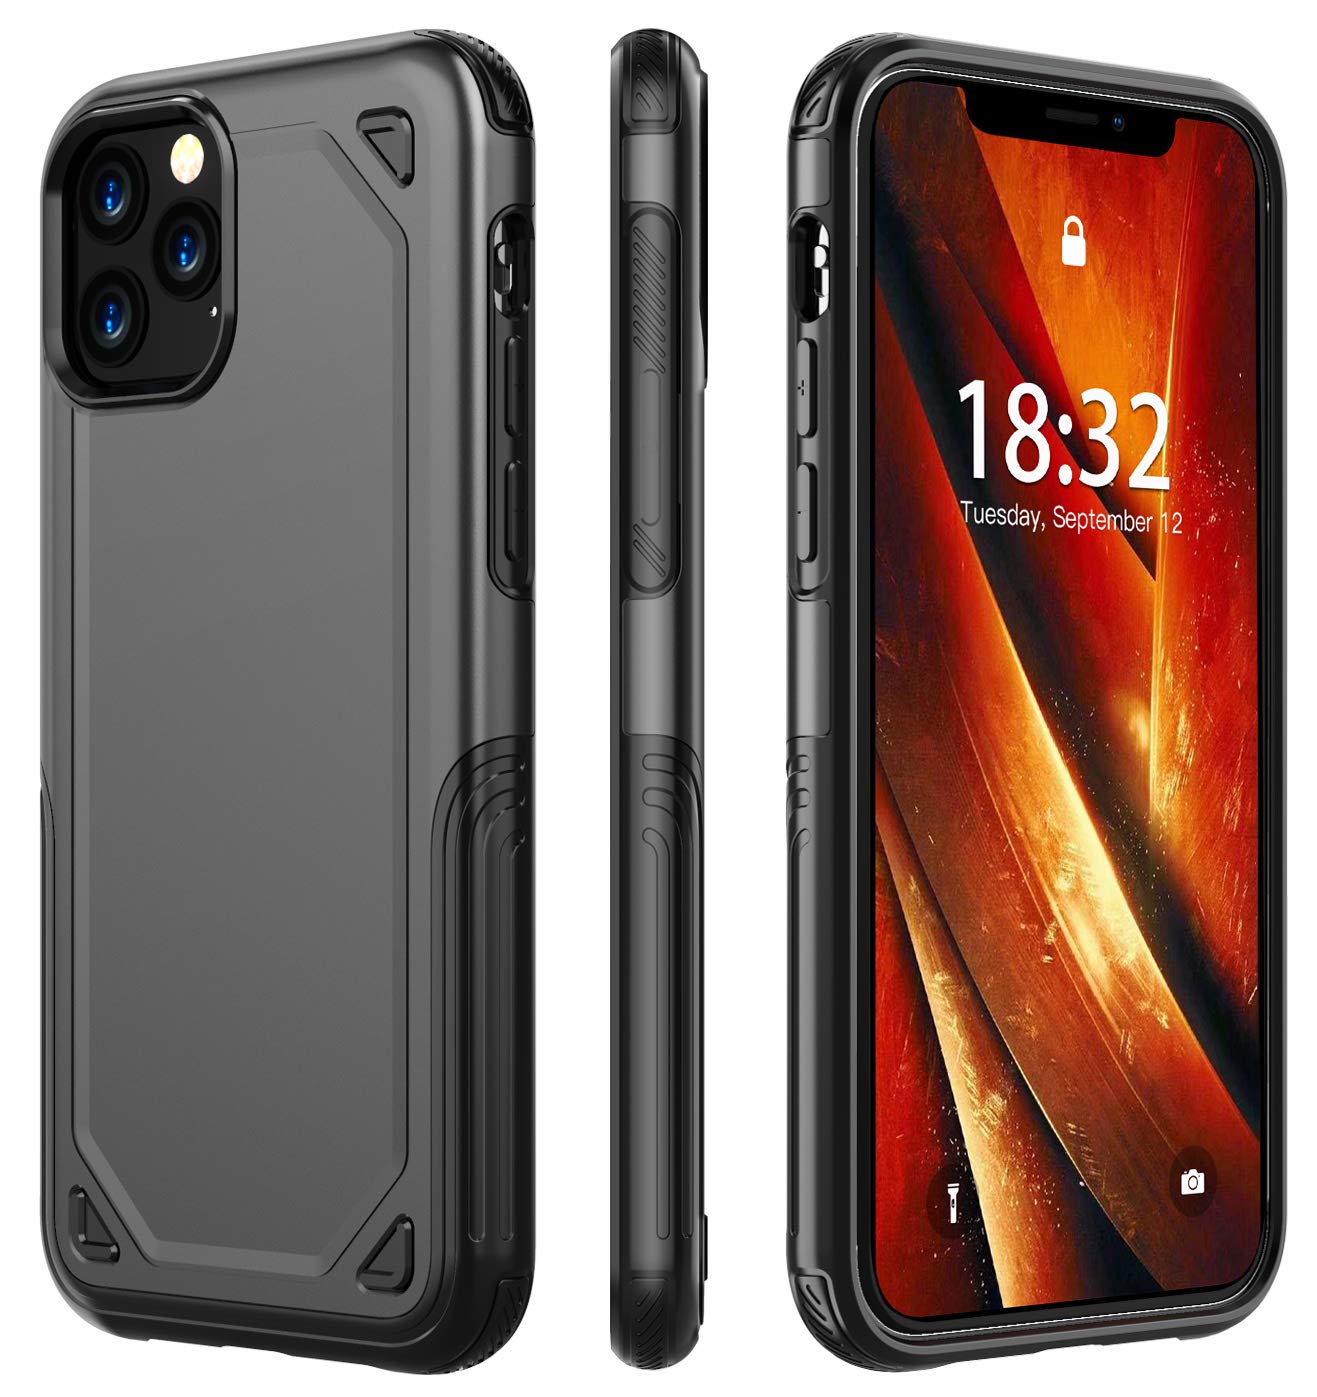 Nineasy-iPhone-11-Pro-Max-cheap-case